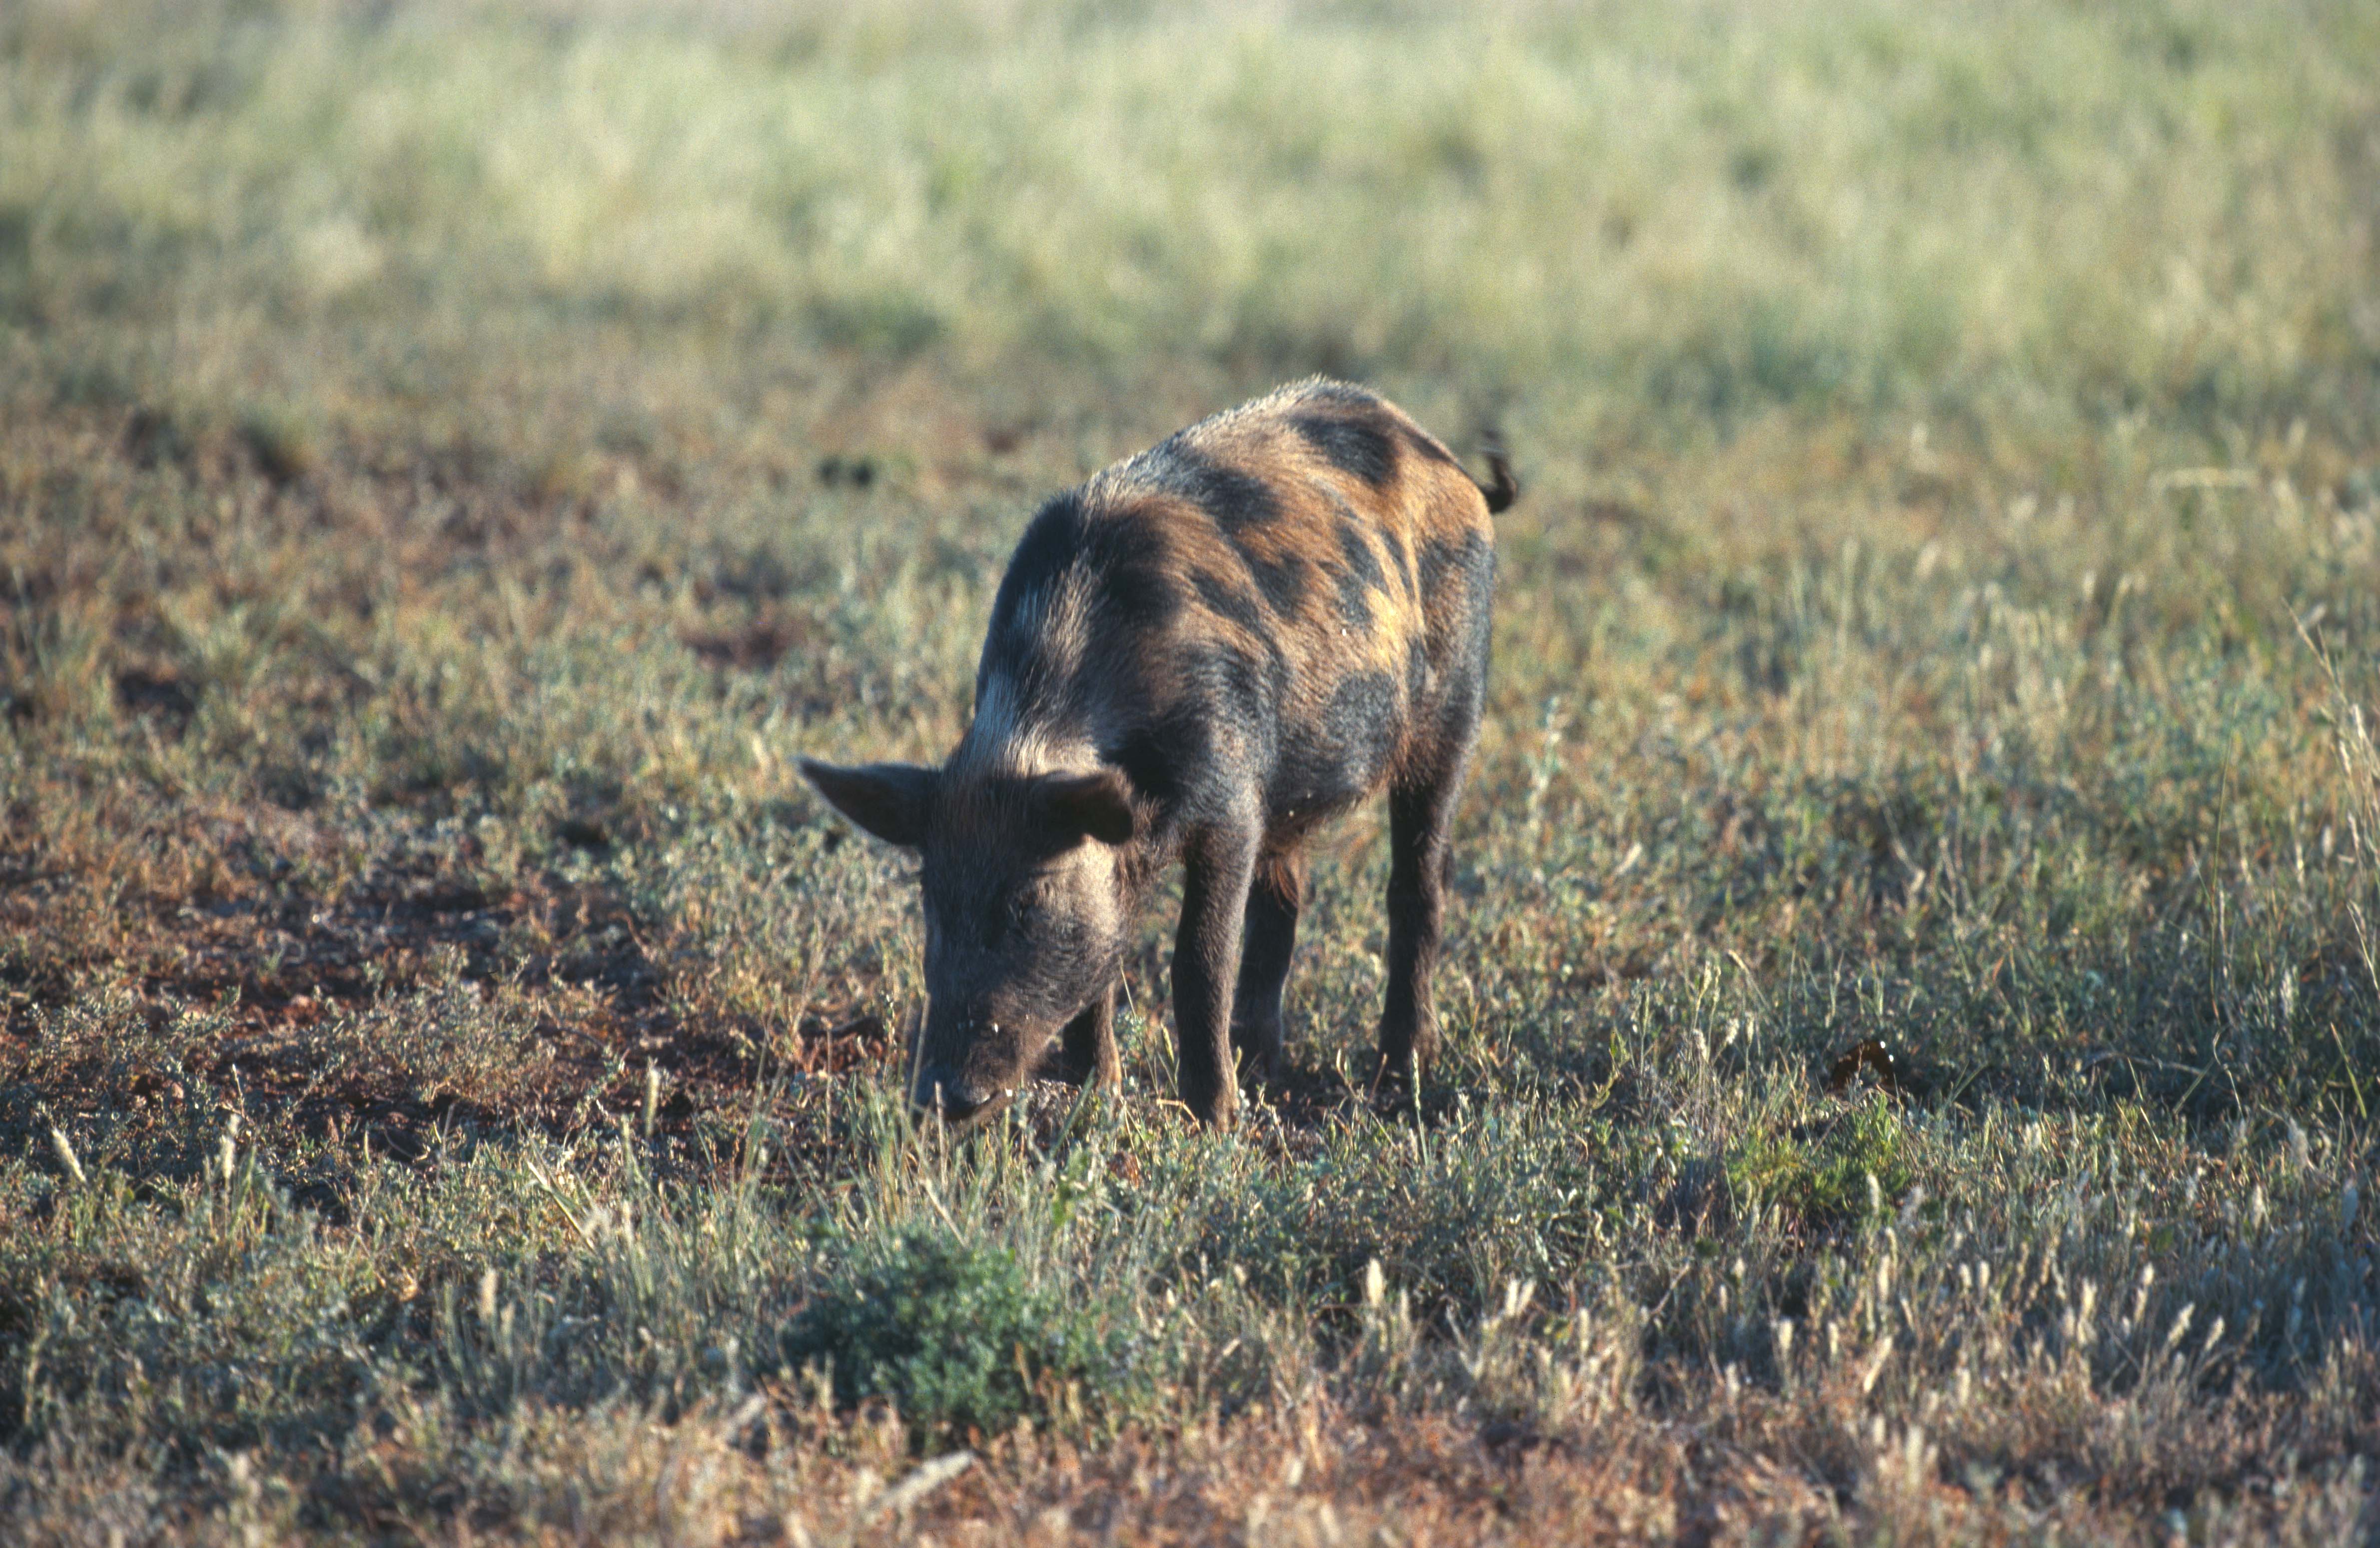 Juvenile feral pig. Photo by Department of Environment and Resource Management - Queensland Government